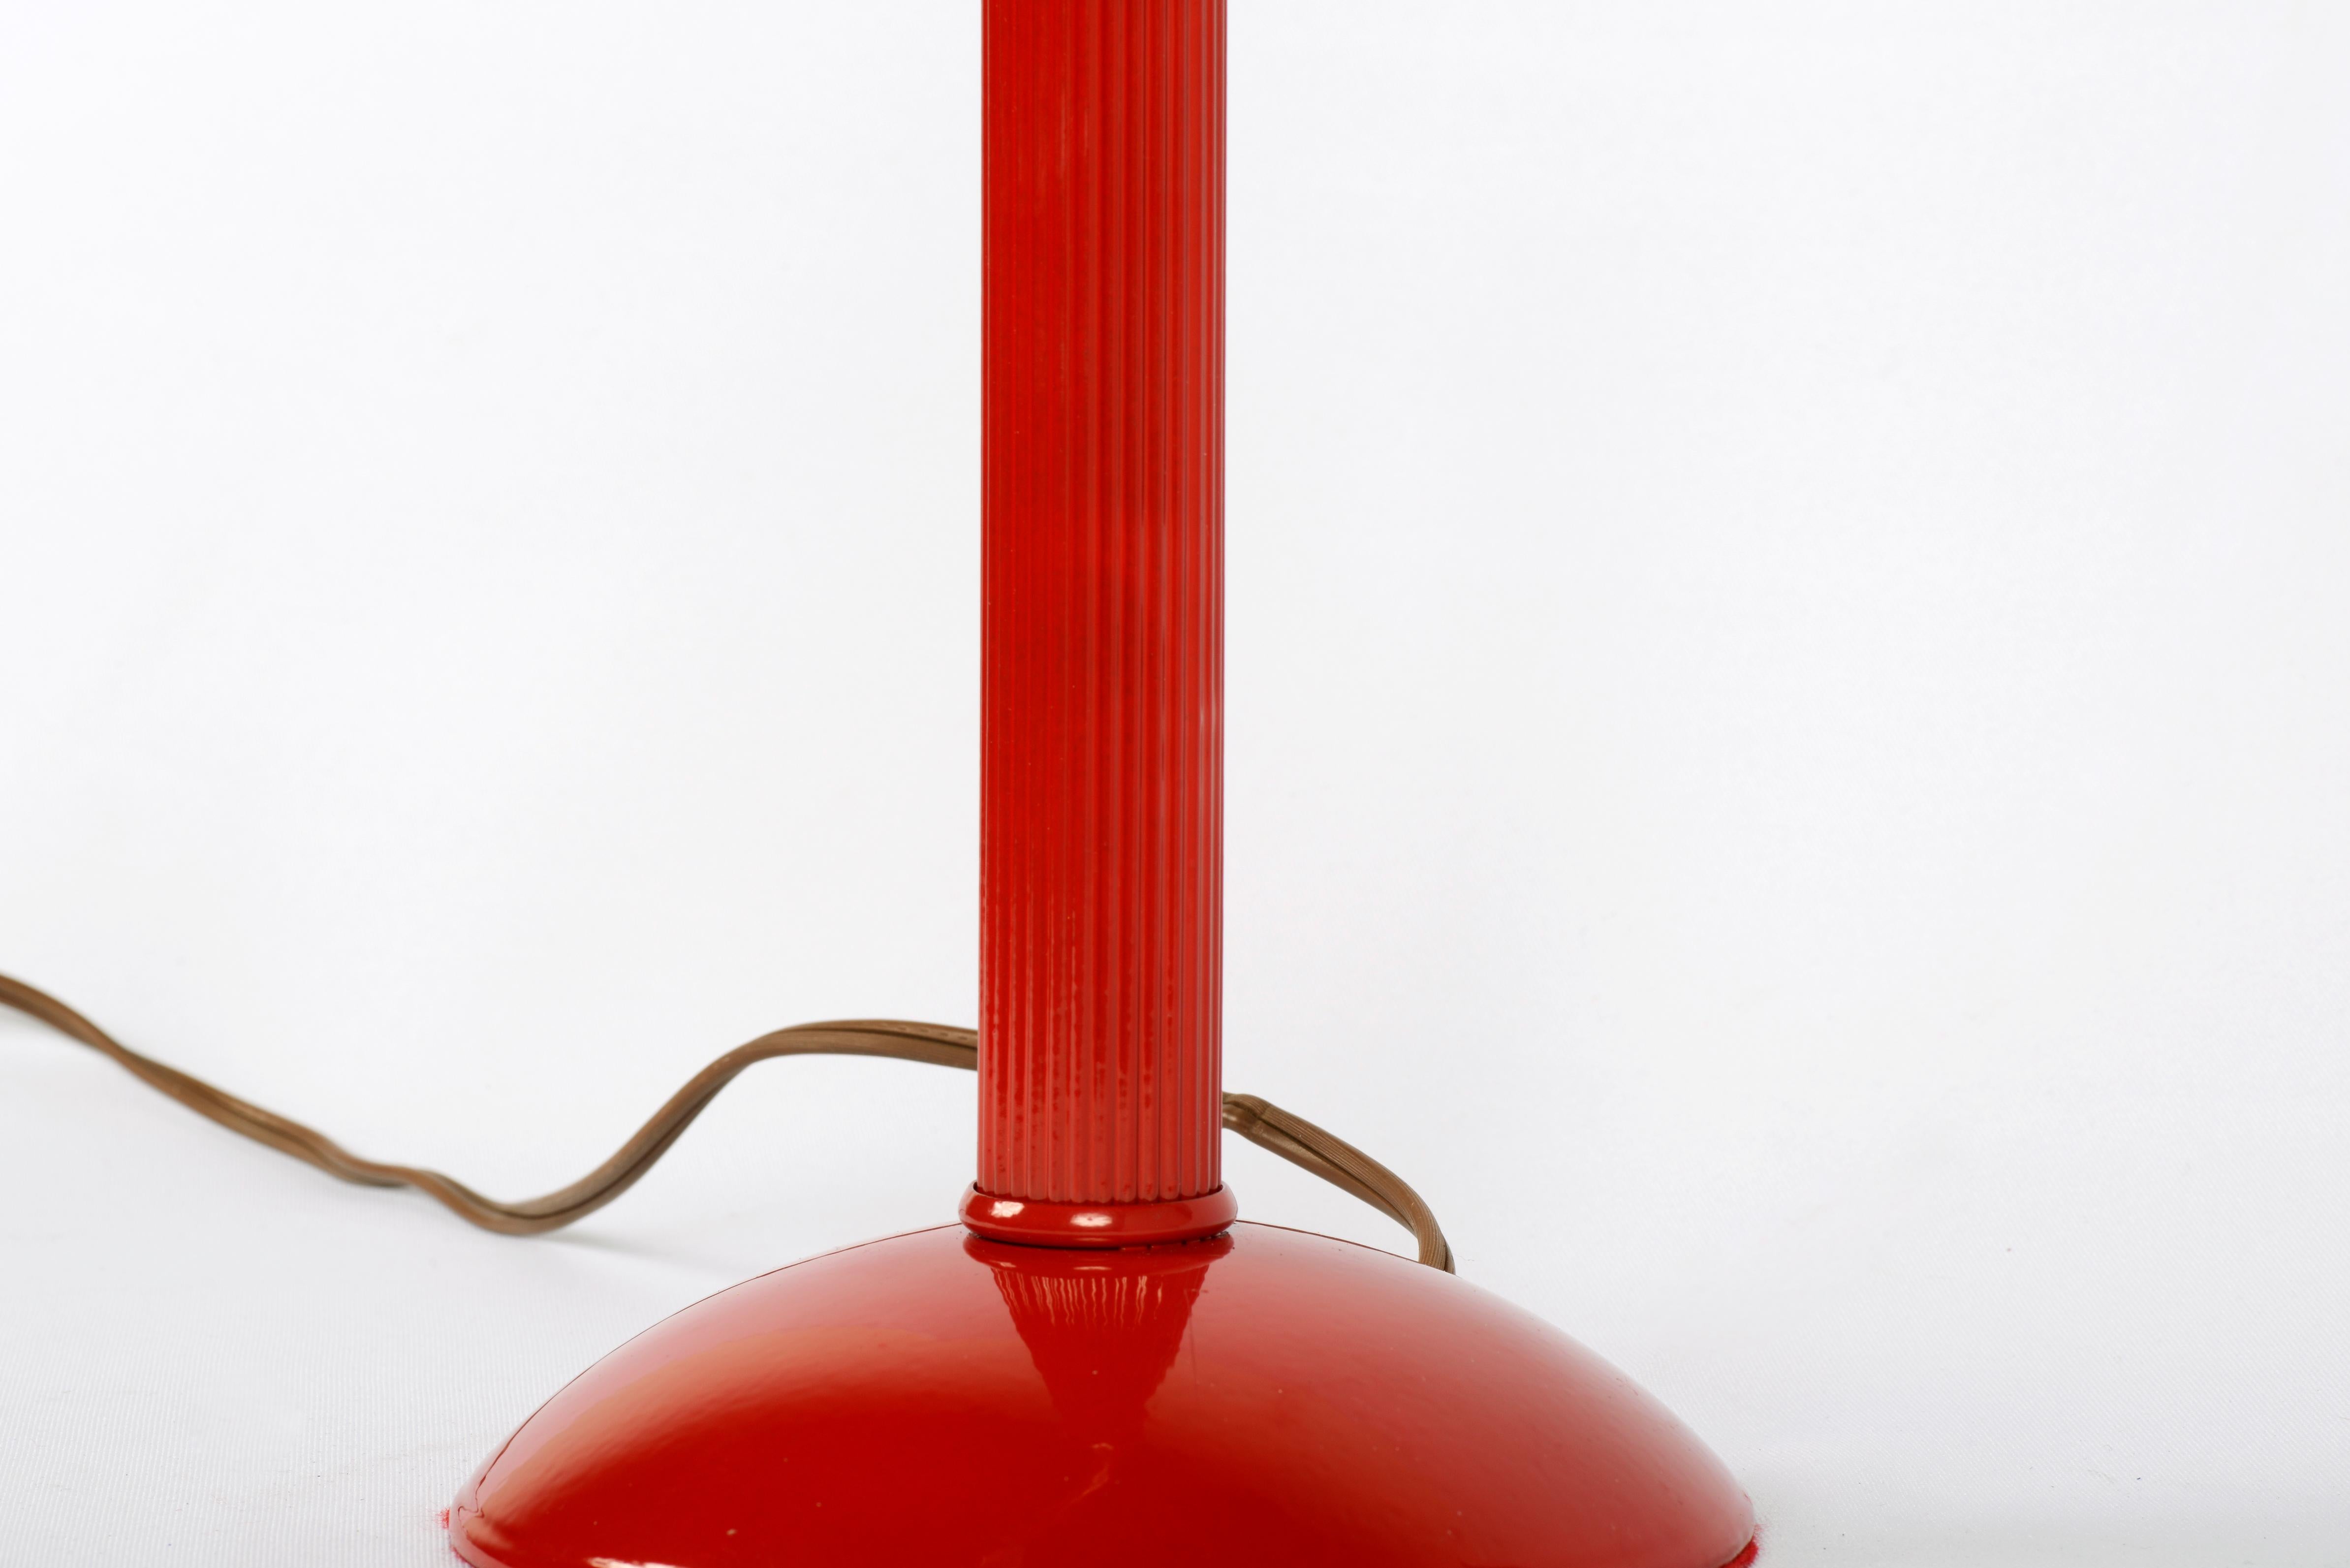 American 1960s Gooseneck Desk Lamp Refinished in Fire Engine Red